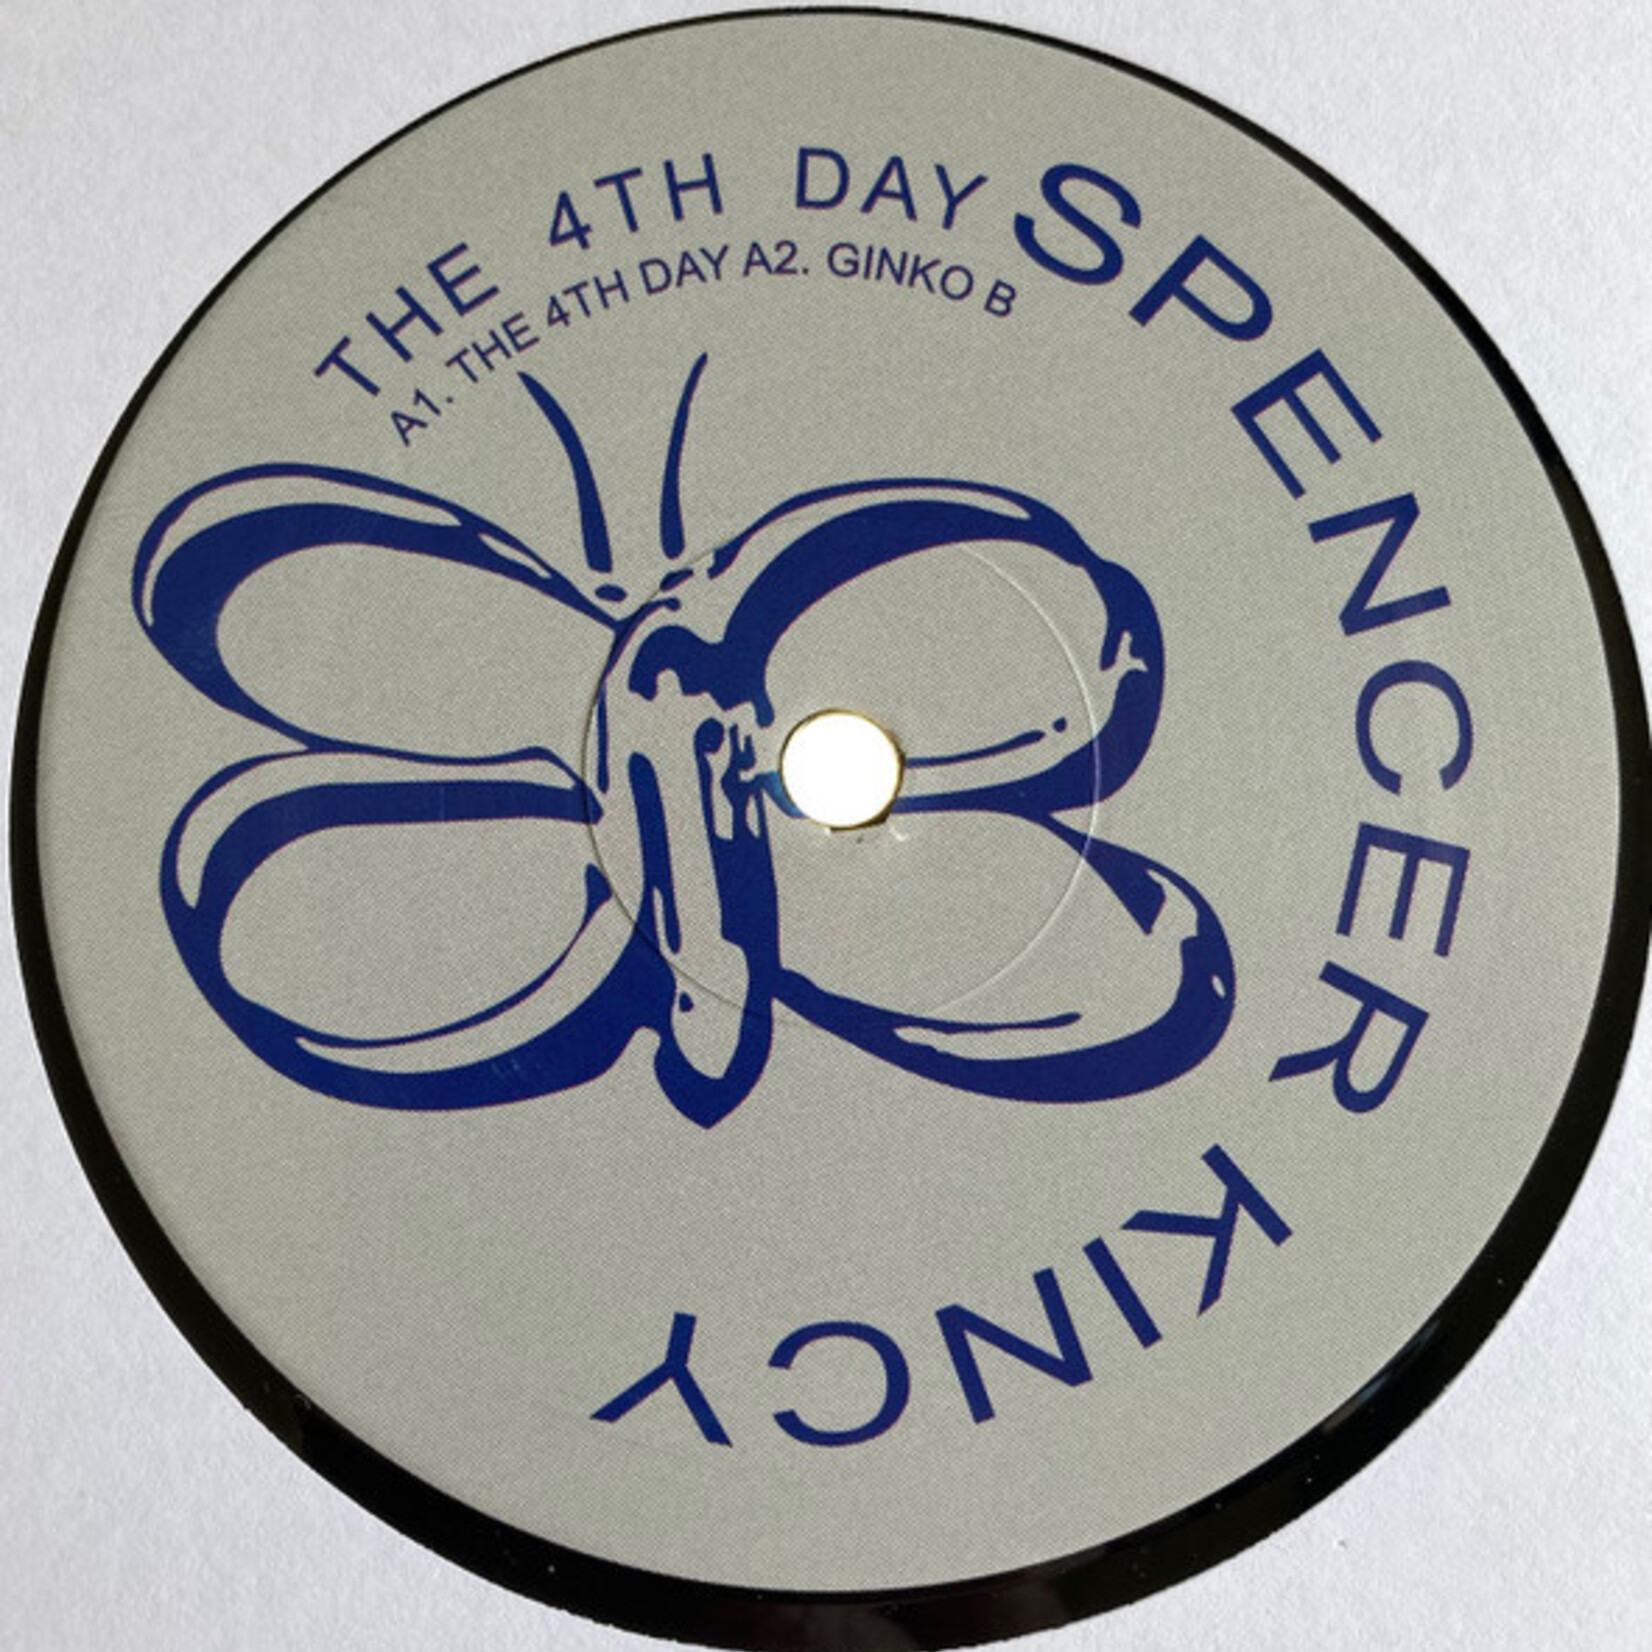 Spencer Kincy – The 4th Day